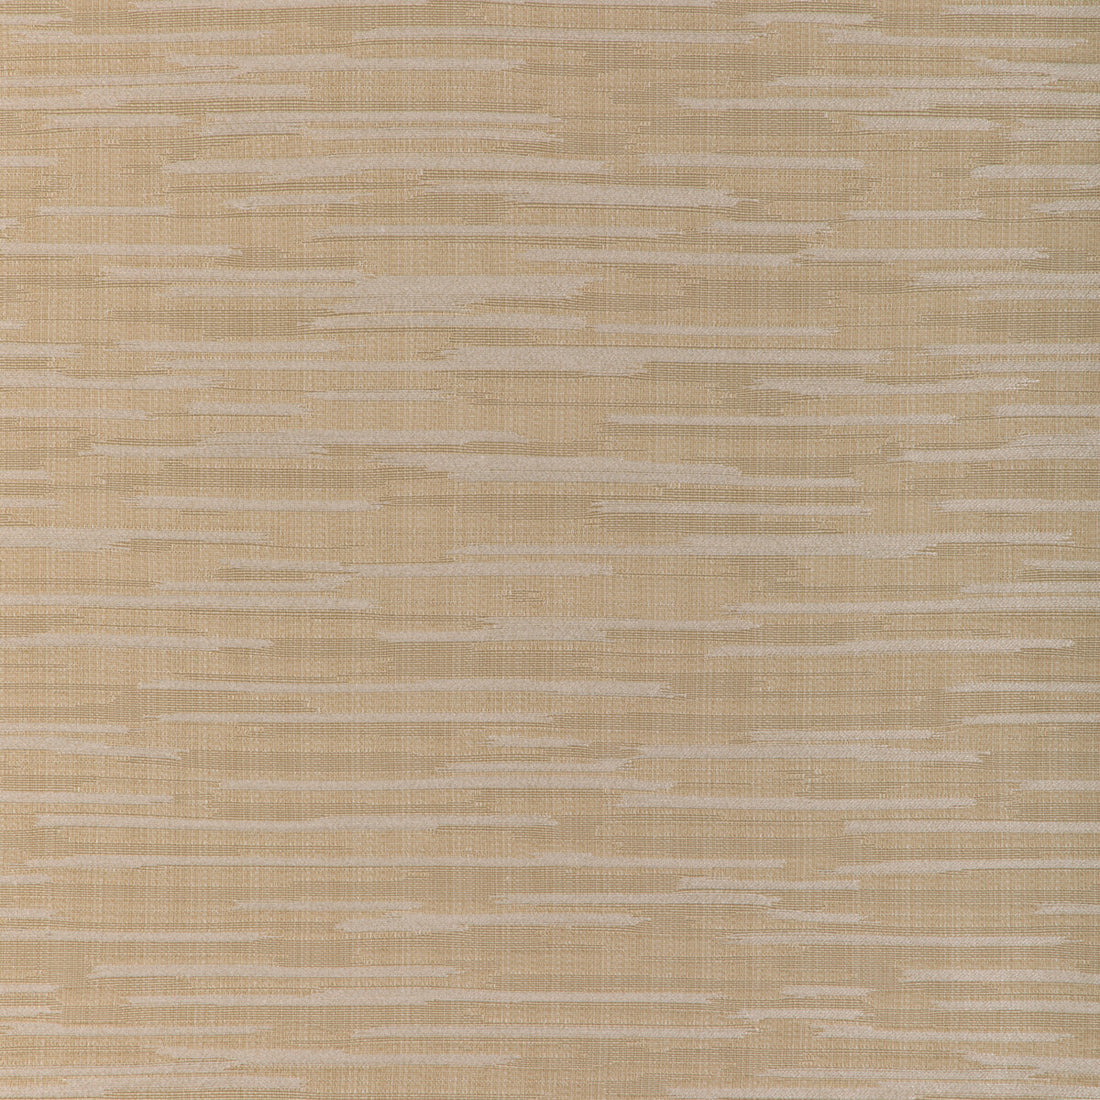 Arles Weave fabric in cream color - pattern 8023134.1116.0 - by Brunschwig &amp; Fils in the Arles Weaves collection